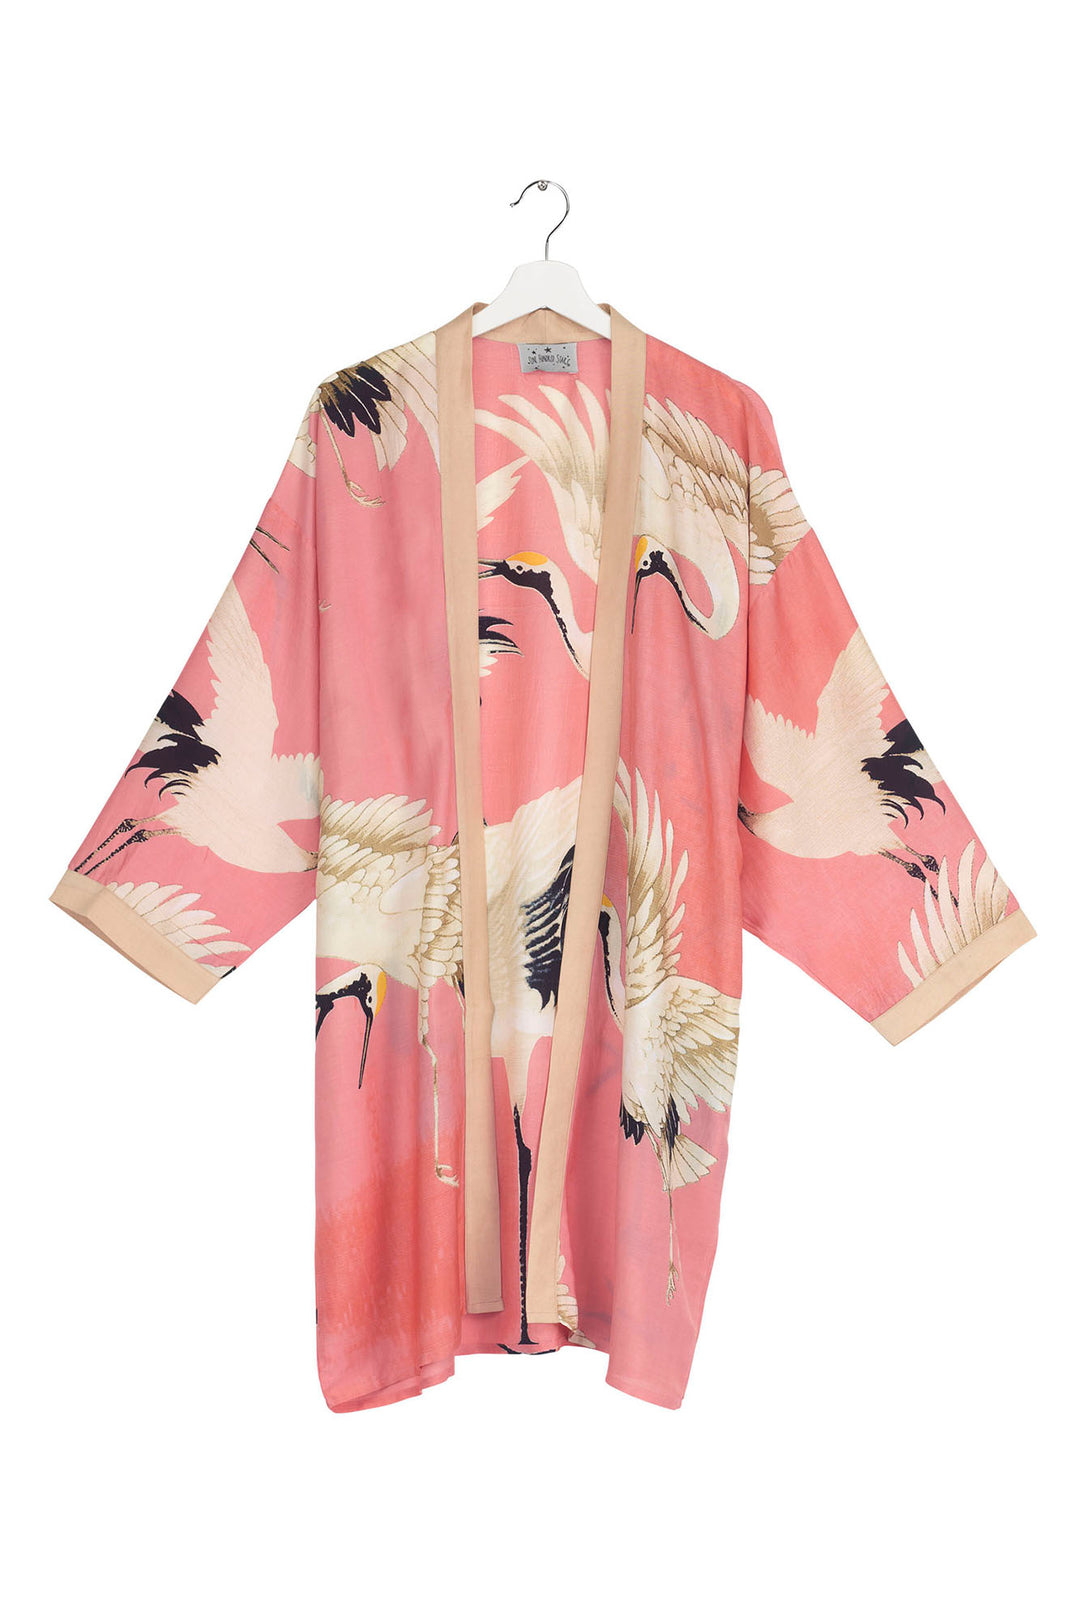 One Hundred Stars Stork Crane Lipstick Pink Collar Kimono - Our mid-length collar kimonos are perfect for adding that stylish edge to your summer wardrobe. This mid length kimono is made from our heavier grade fabric for excellent depth of colour and a more luxurious feel.